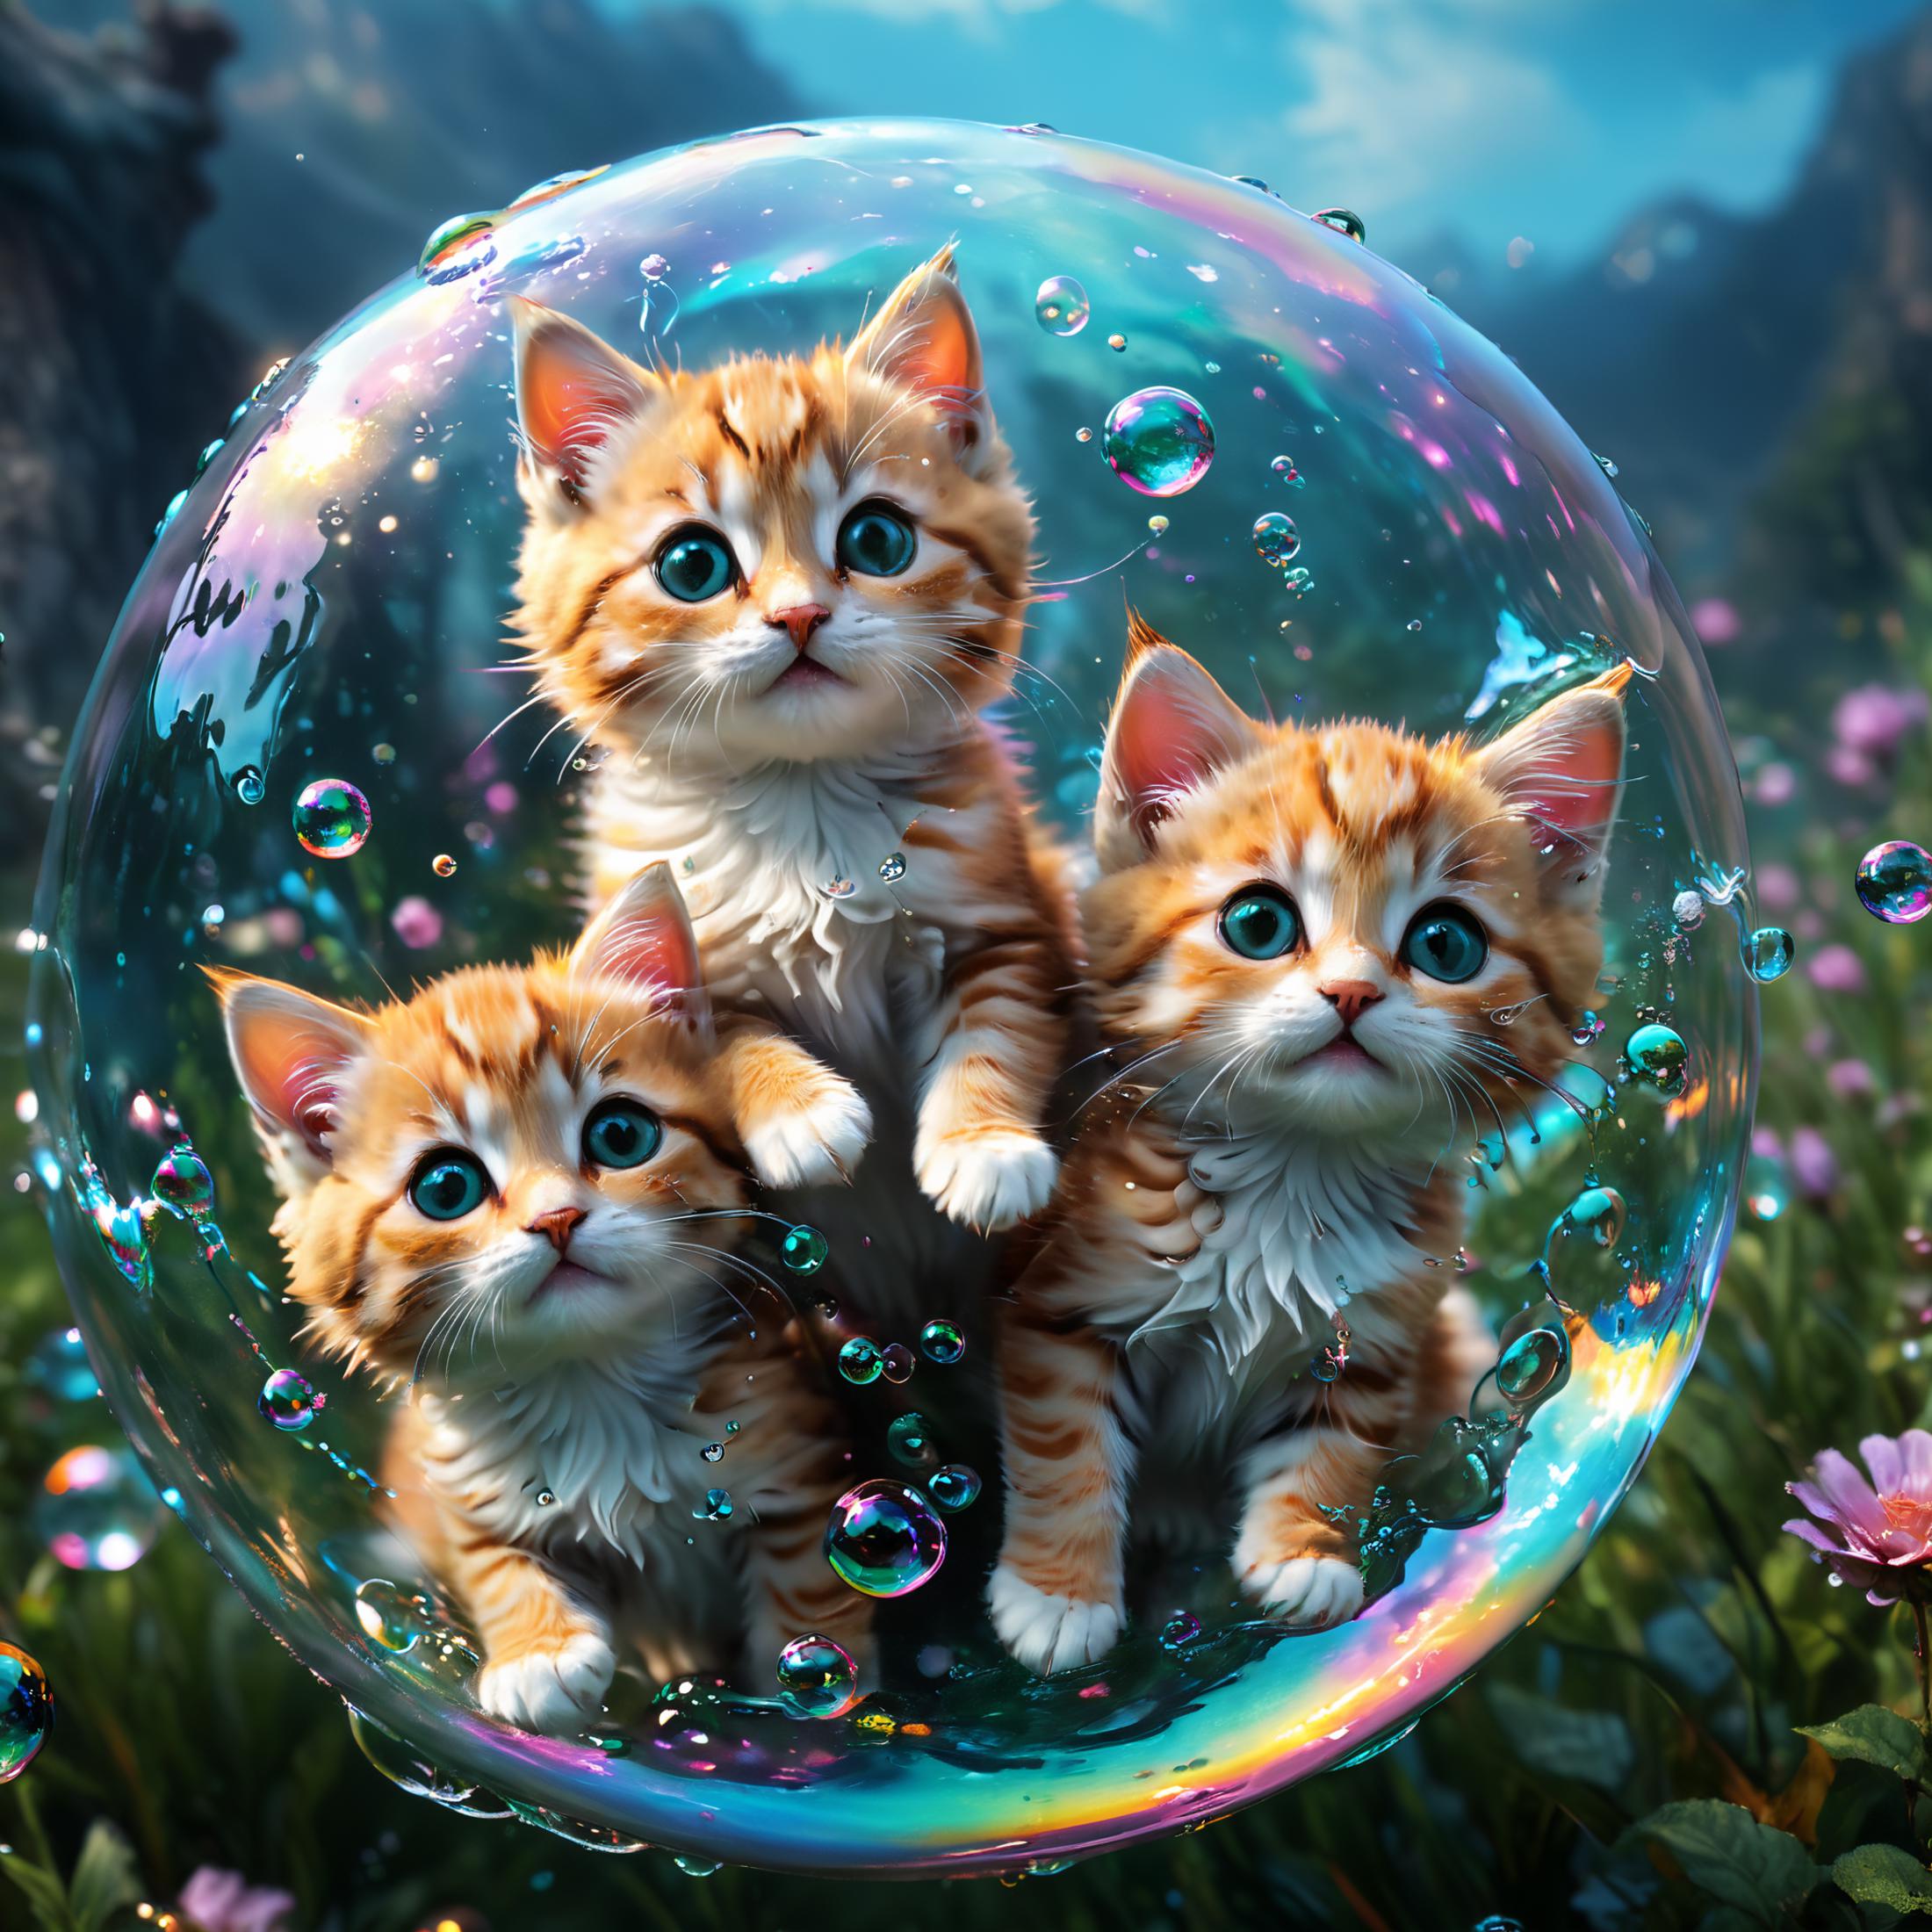 Three Kittens Inside a Bubble, with One Paw Sticking Out